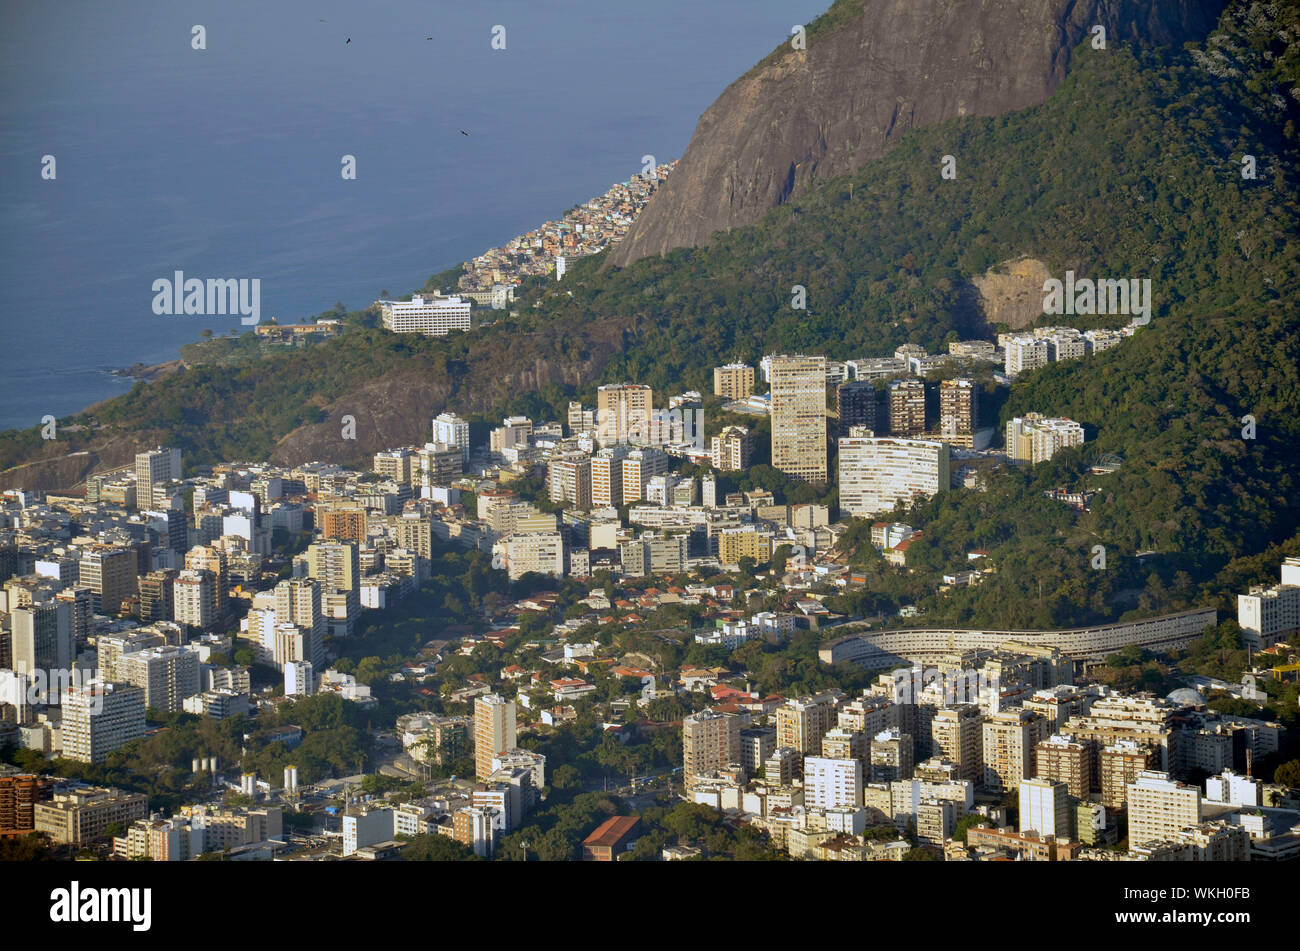 Scenic View Of Houses By Mountain At Morro Dois Irmaos Against Sea Stock Photo